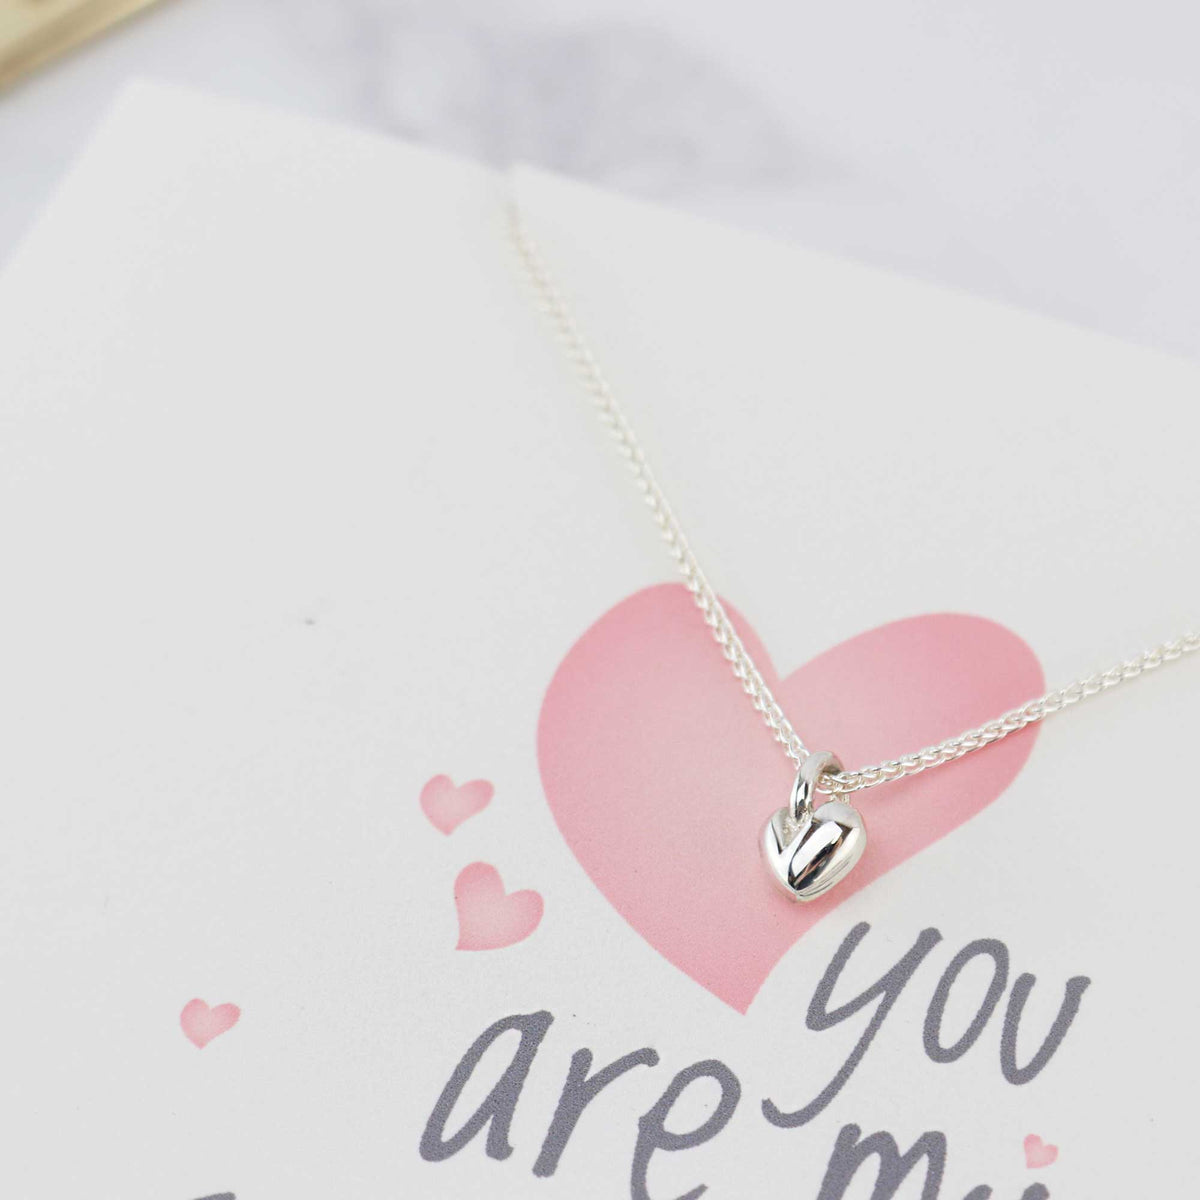 personalised card for girlfriend on valentines card with silver heart pendant from Scarlett Jewellery